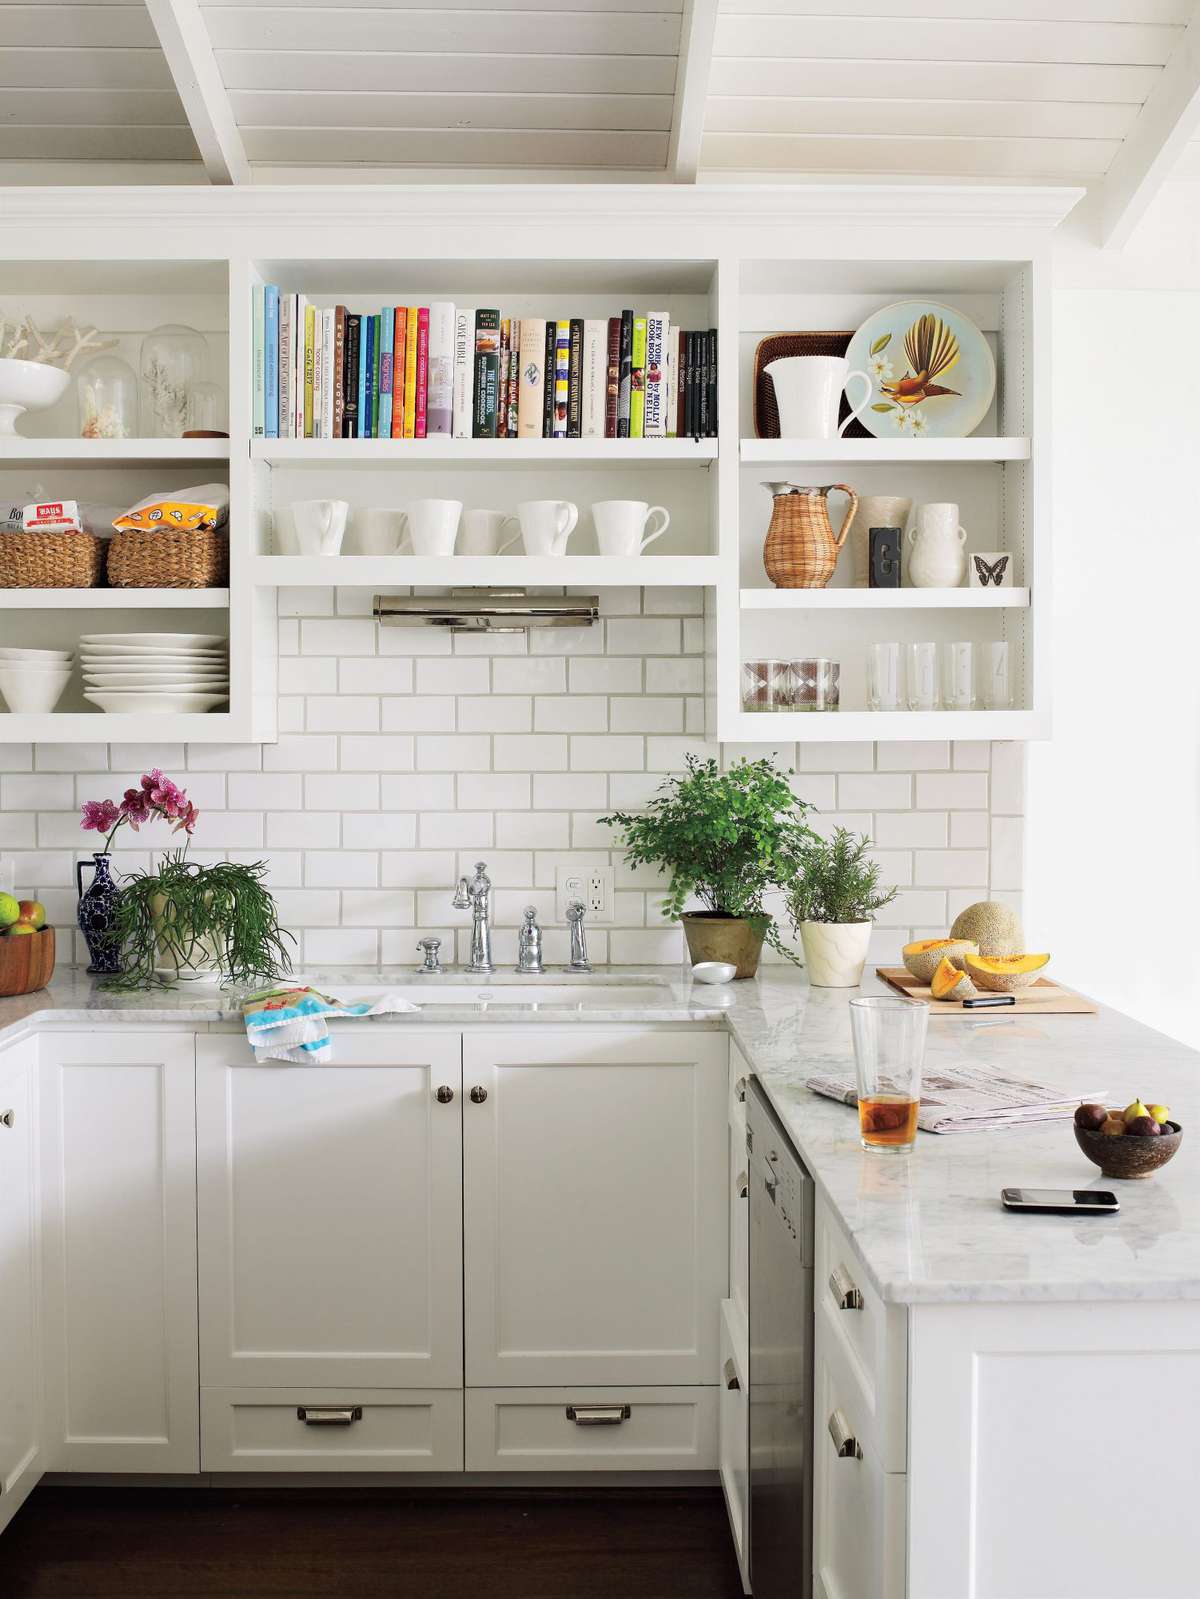 18 Paint Colors for Small Kitchens, According to Designers ...